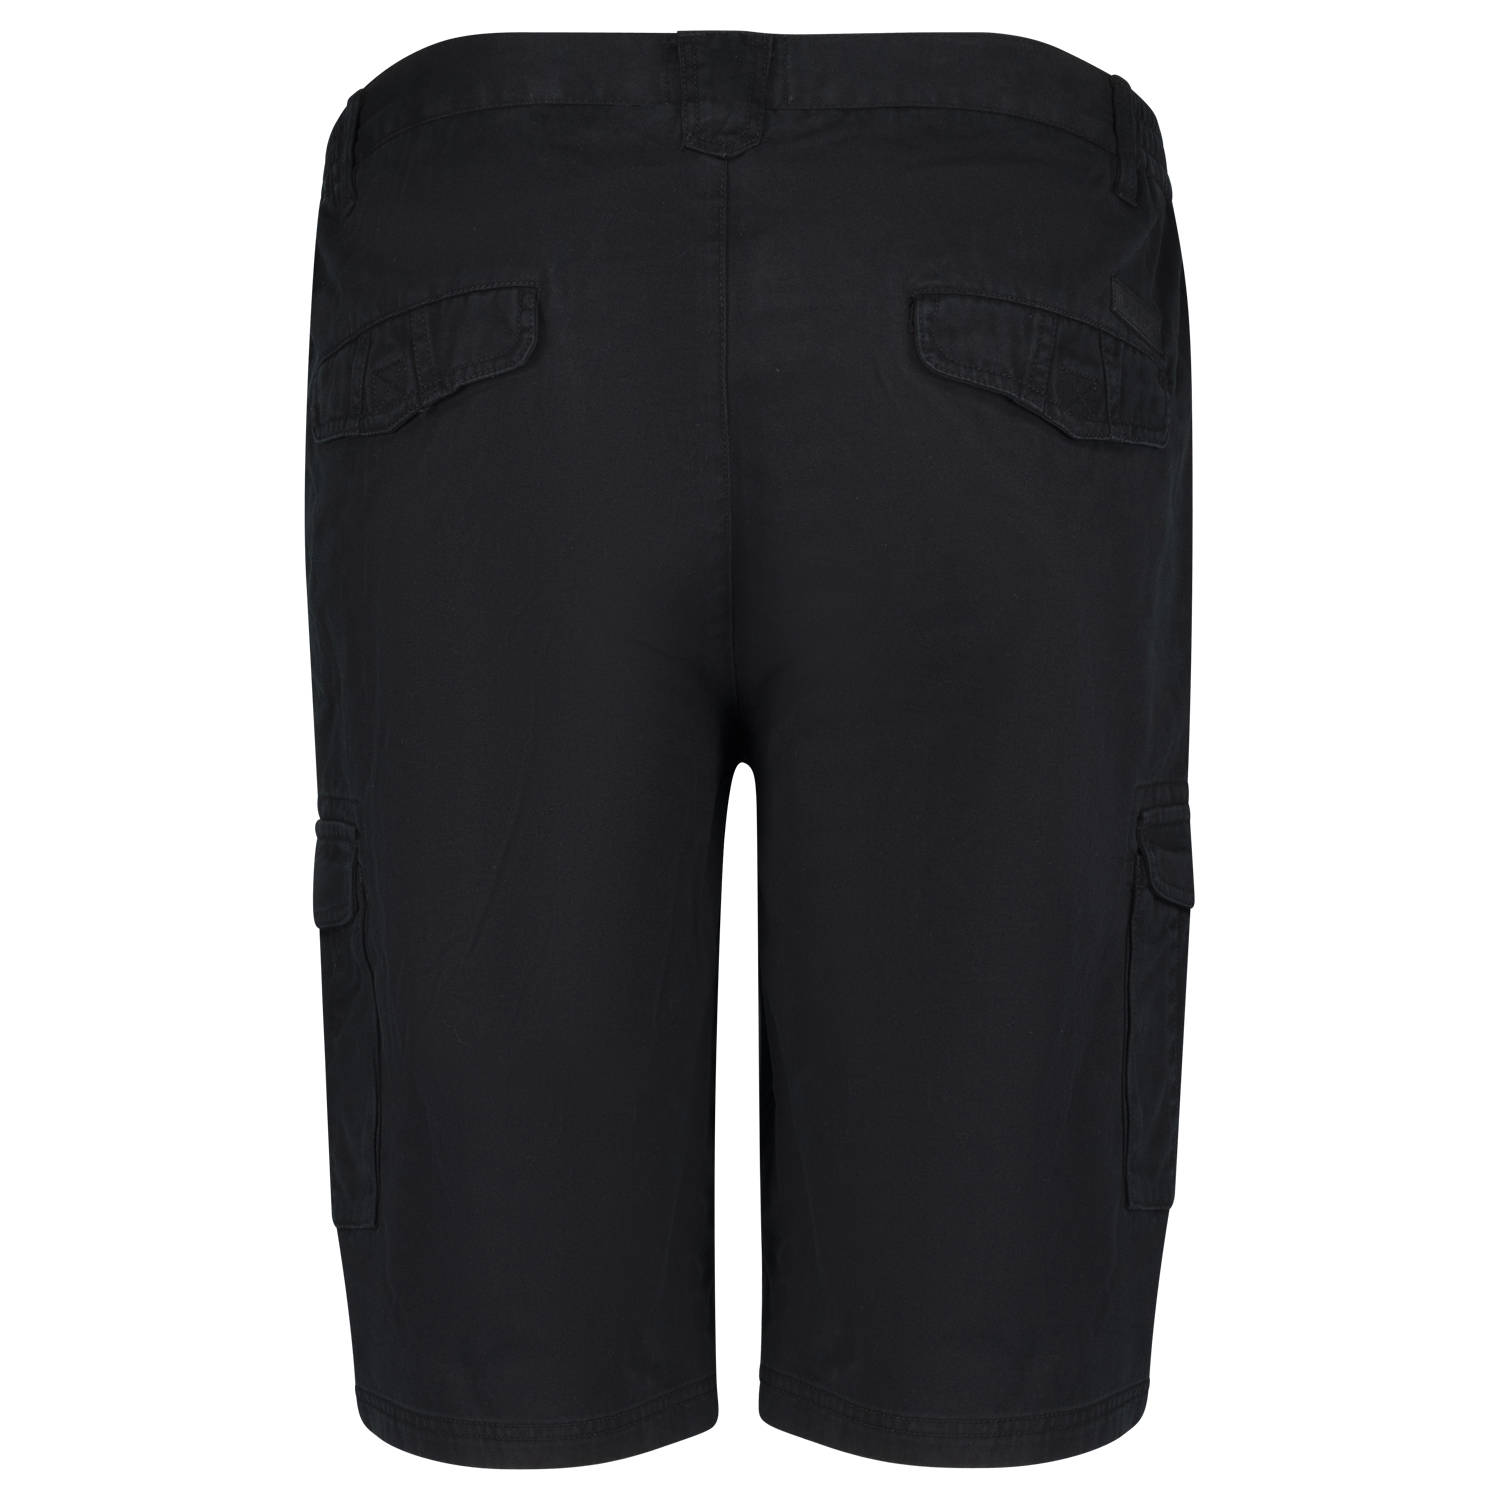 Black cargo shorts by North 56°4 in oversizes until 8XL